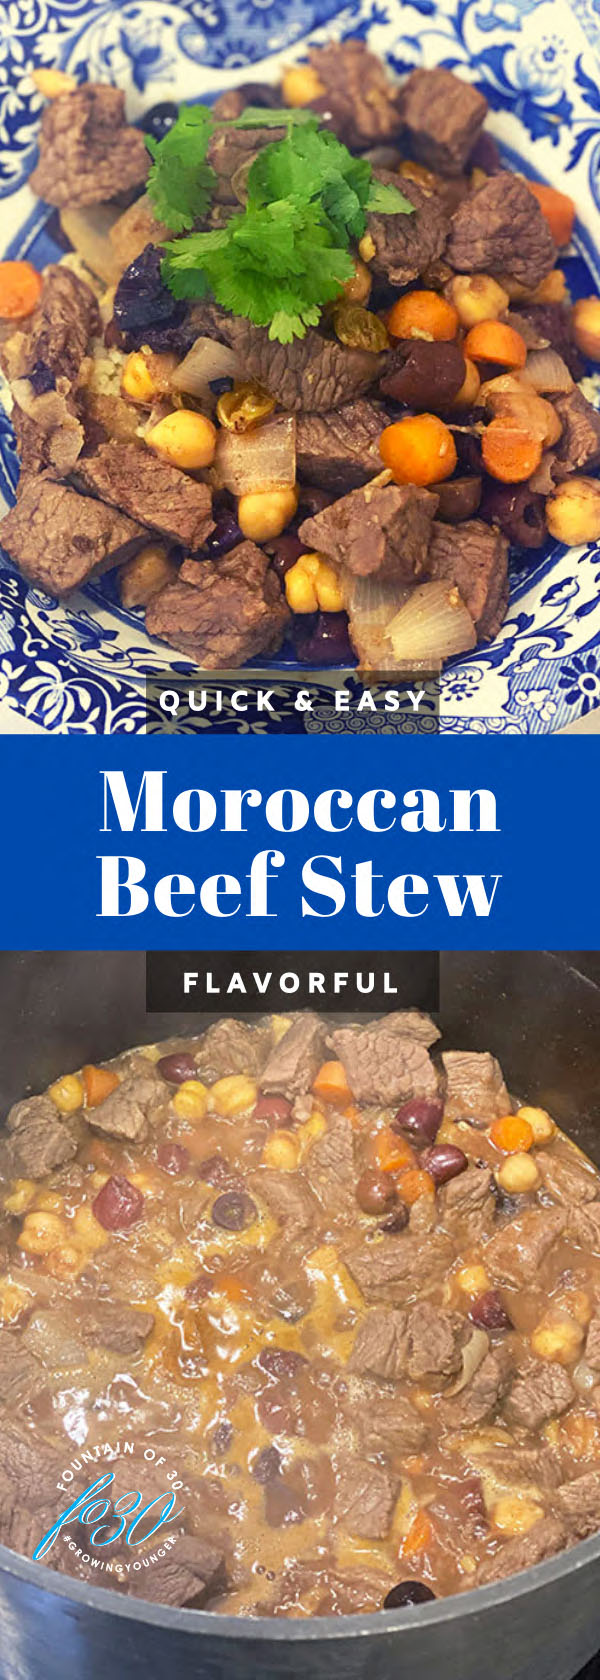 easy moroccan beef stew fountainof30